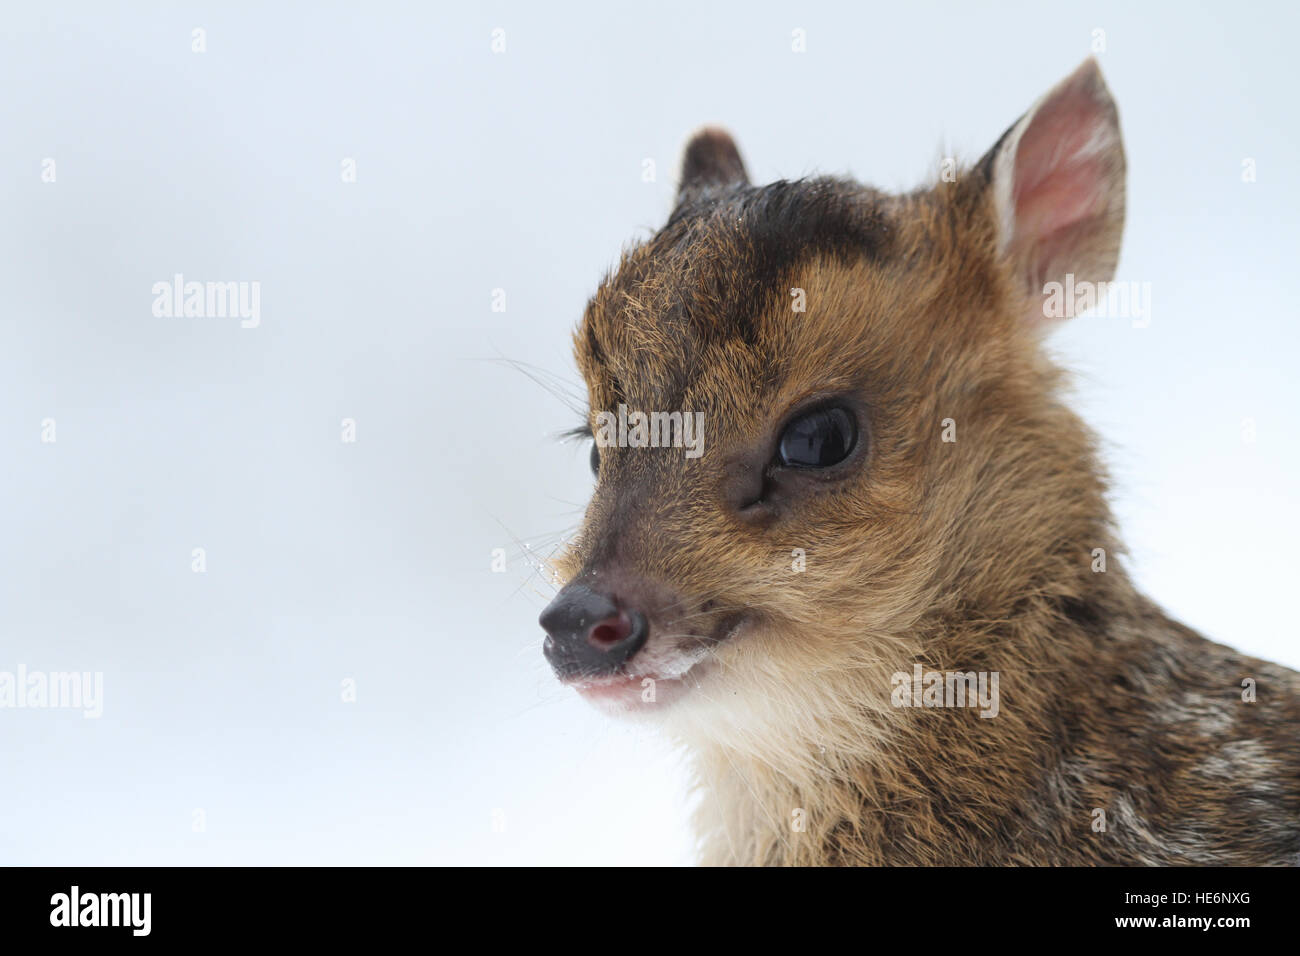 A head shot of a baby Muntjac Deer (Muntiacus reevesi). A non-native species born in the snow in winter in England. Stock Photo